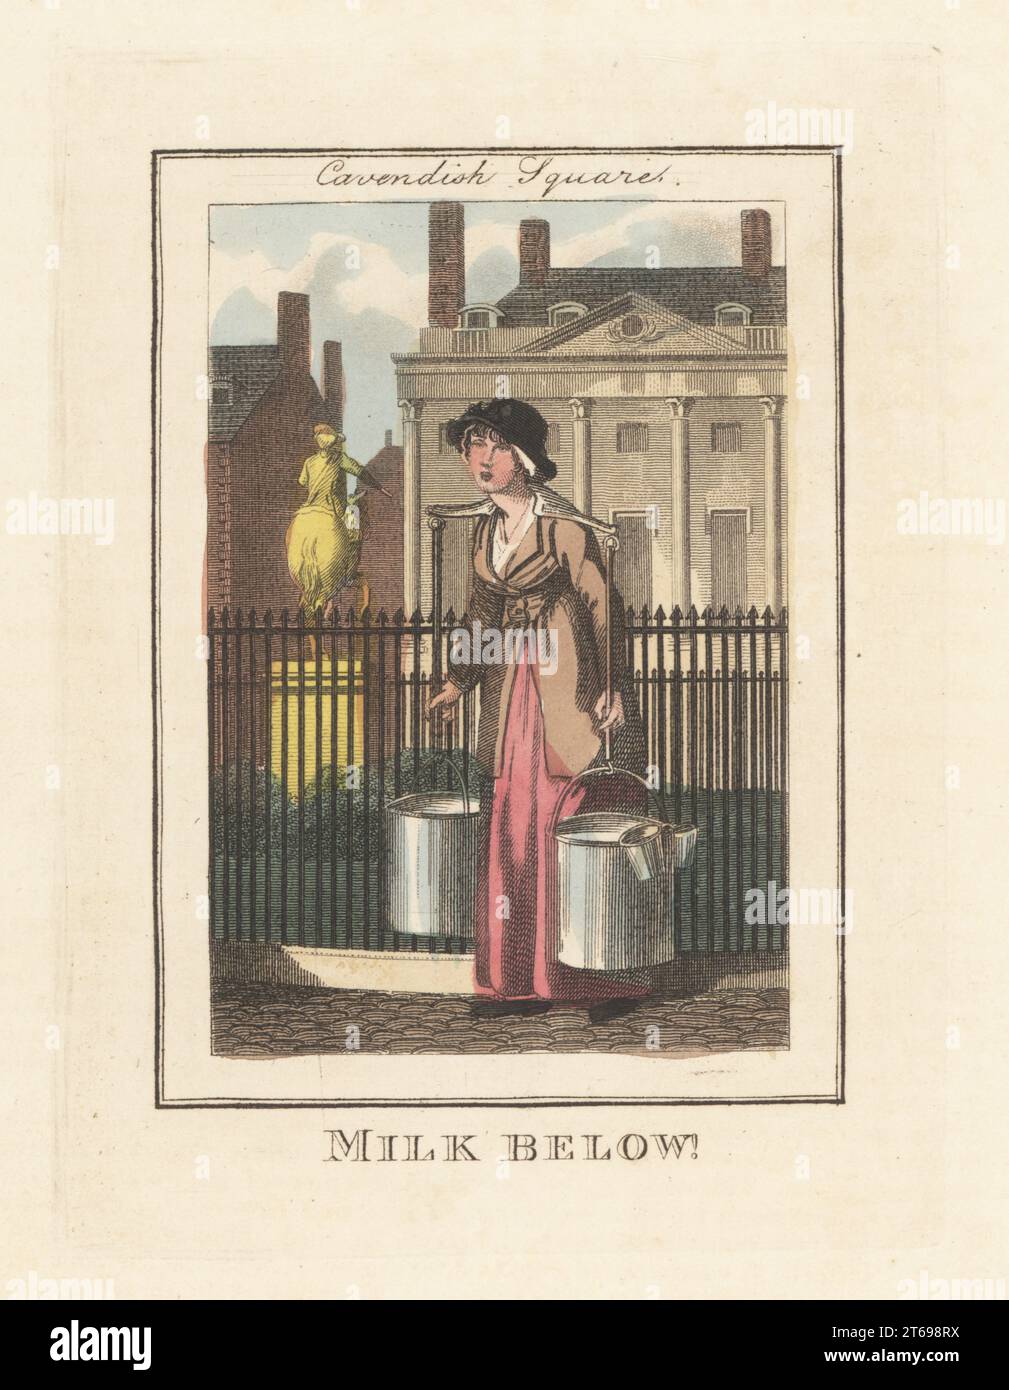 Milk-maid selling fresh milk in Cavendish Square. Welsh girl in bonnet, coat and skirts, with yoke and two large pales of milk. Milk below. The golden equestrian statue of the Butcher of Culloden, Prince William, Duke of Cumberland. Handcoloured copperplate engraving by Edward Edwards after an illustration by William Marshall Craig from Description of the Plates Representing the Itinerant Traders of London, Richard Phillips, No. 71 St Pauls Churchyard, London, 1805. Stock Photo